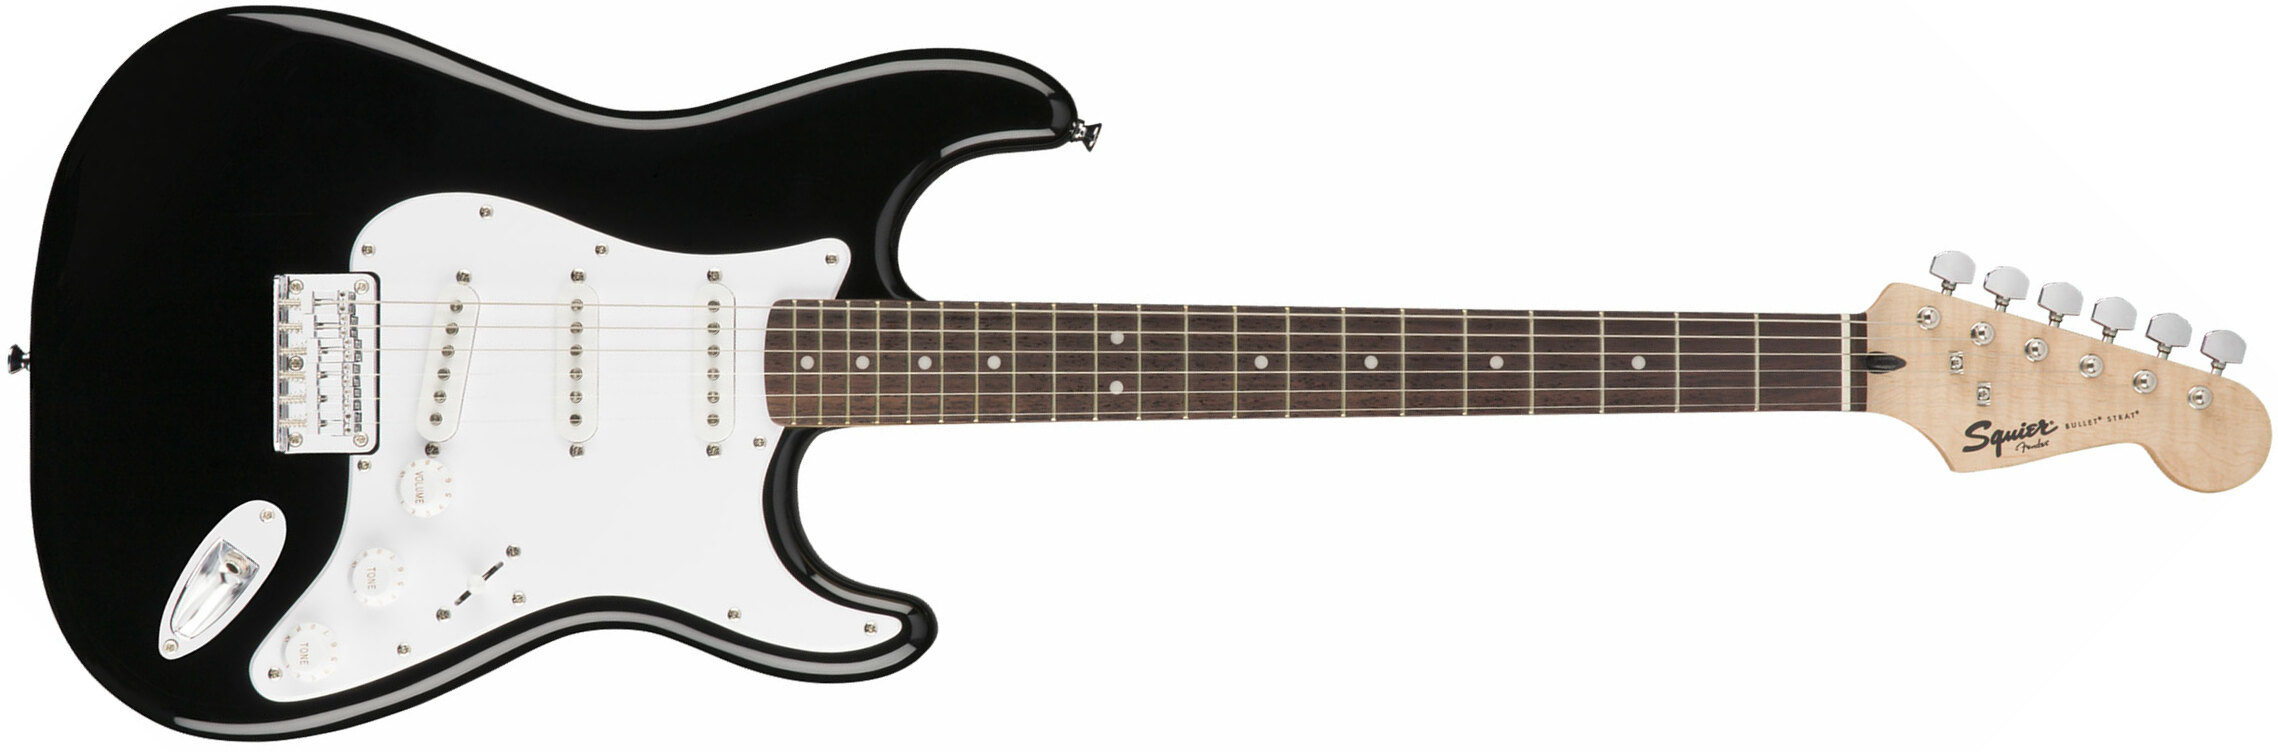 Squier Bullet Stratocaster Ht Sss Rw - Black - Str shape electric guitar - Main picture